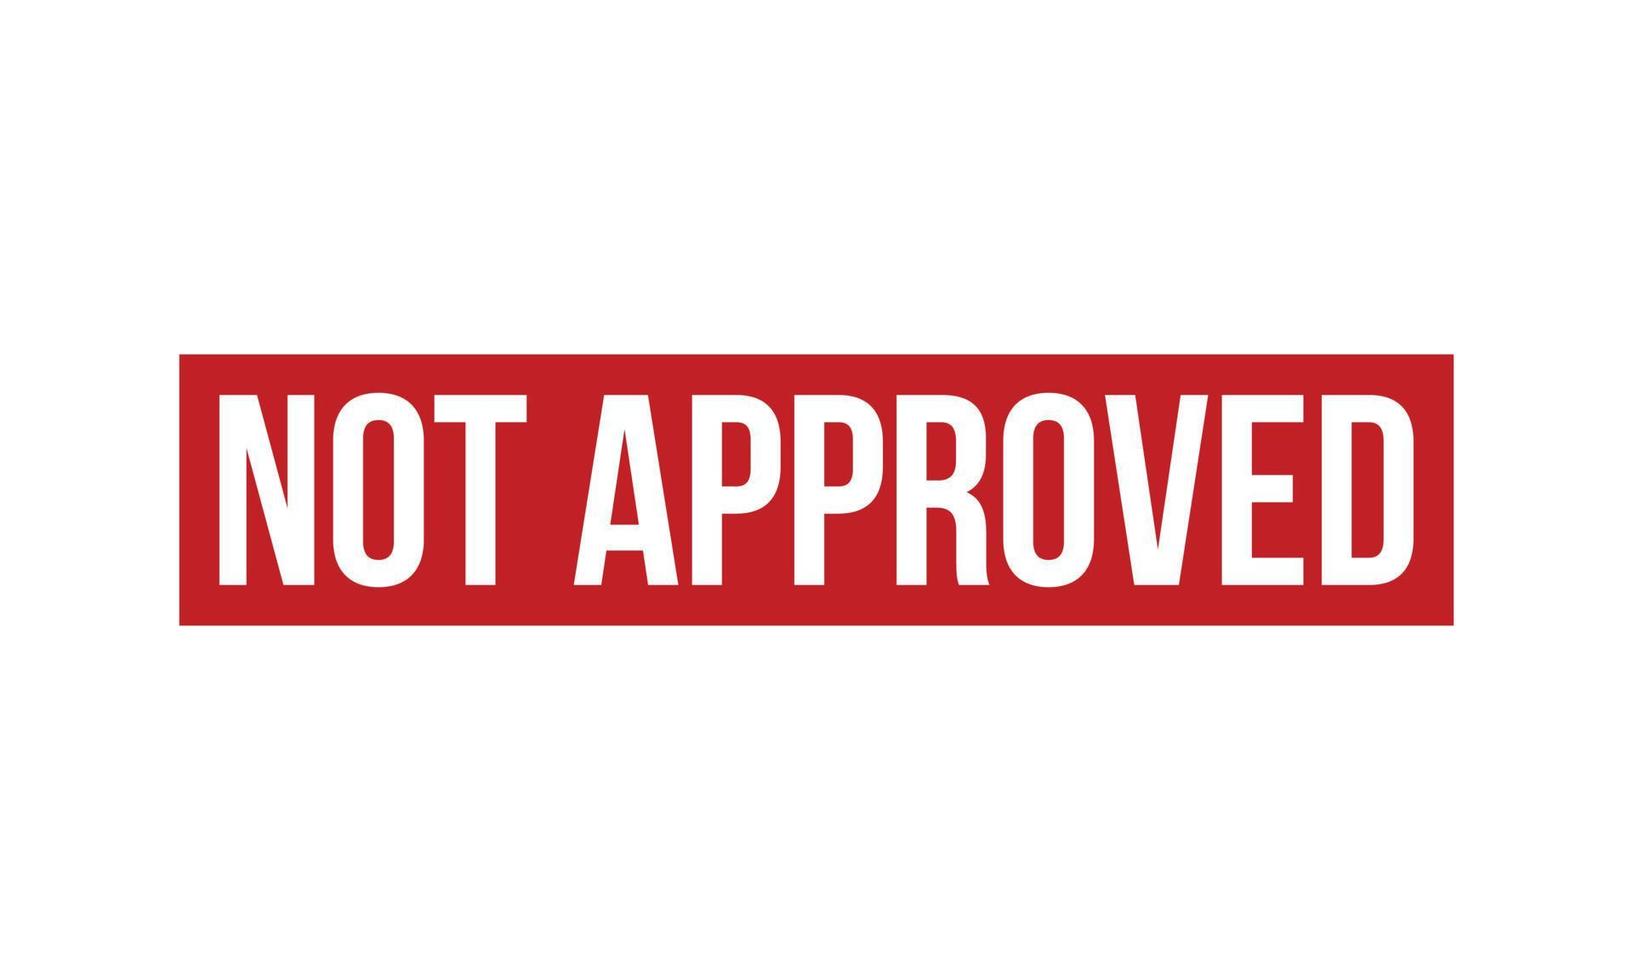 Not Approved Rubber Stamp. Red Not Approved Rubber Grunge Stamp Seal Vector Illustration